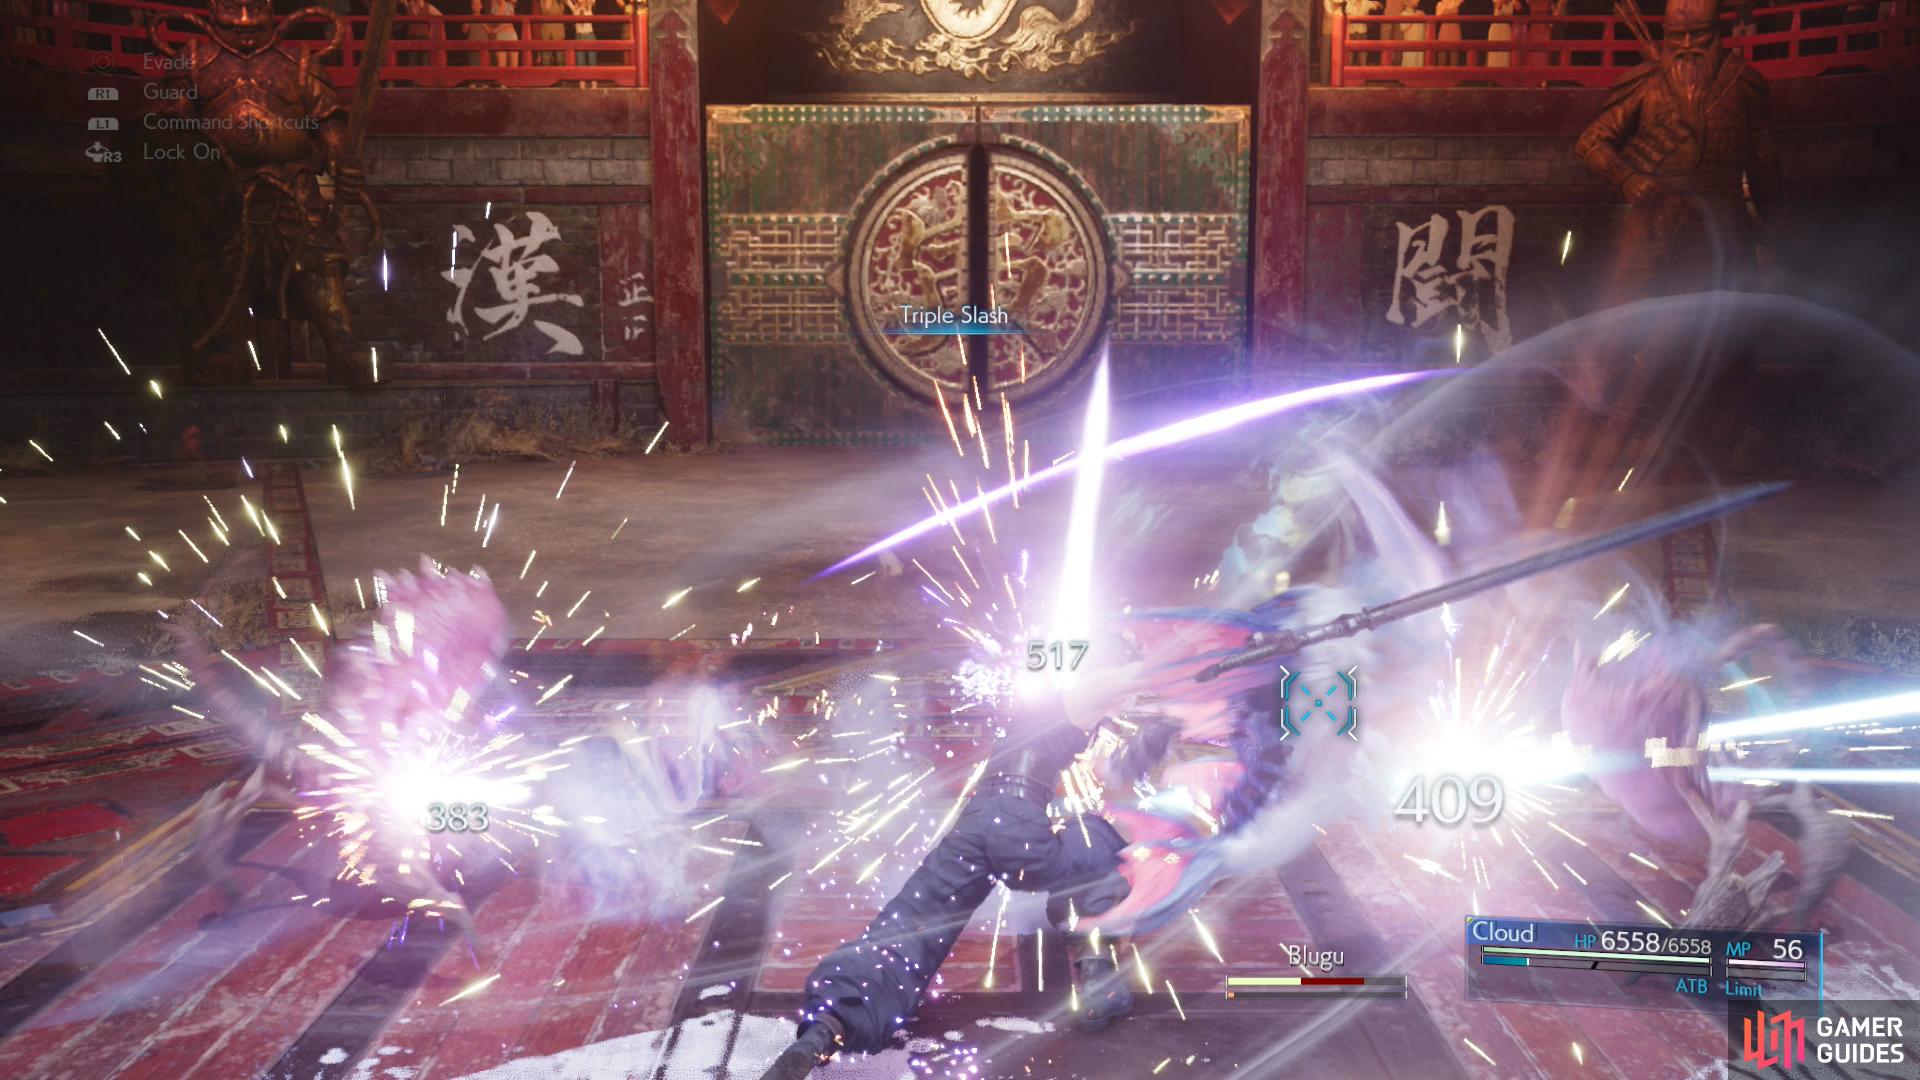 The enemy you'll face in the optional arena battles are incredibly weak - one Triple Slash will often suffice.